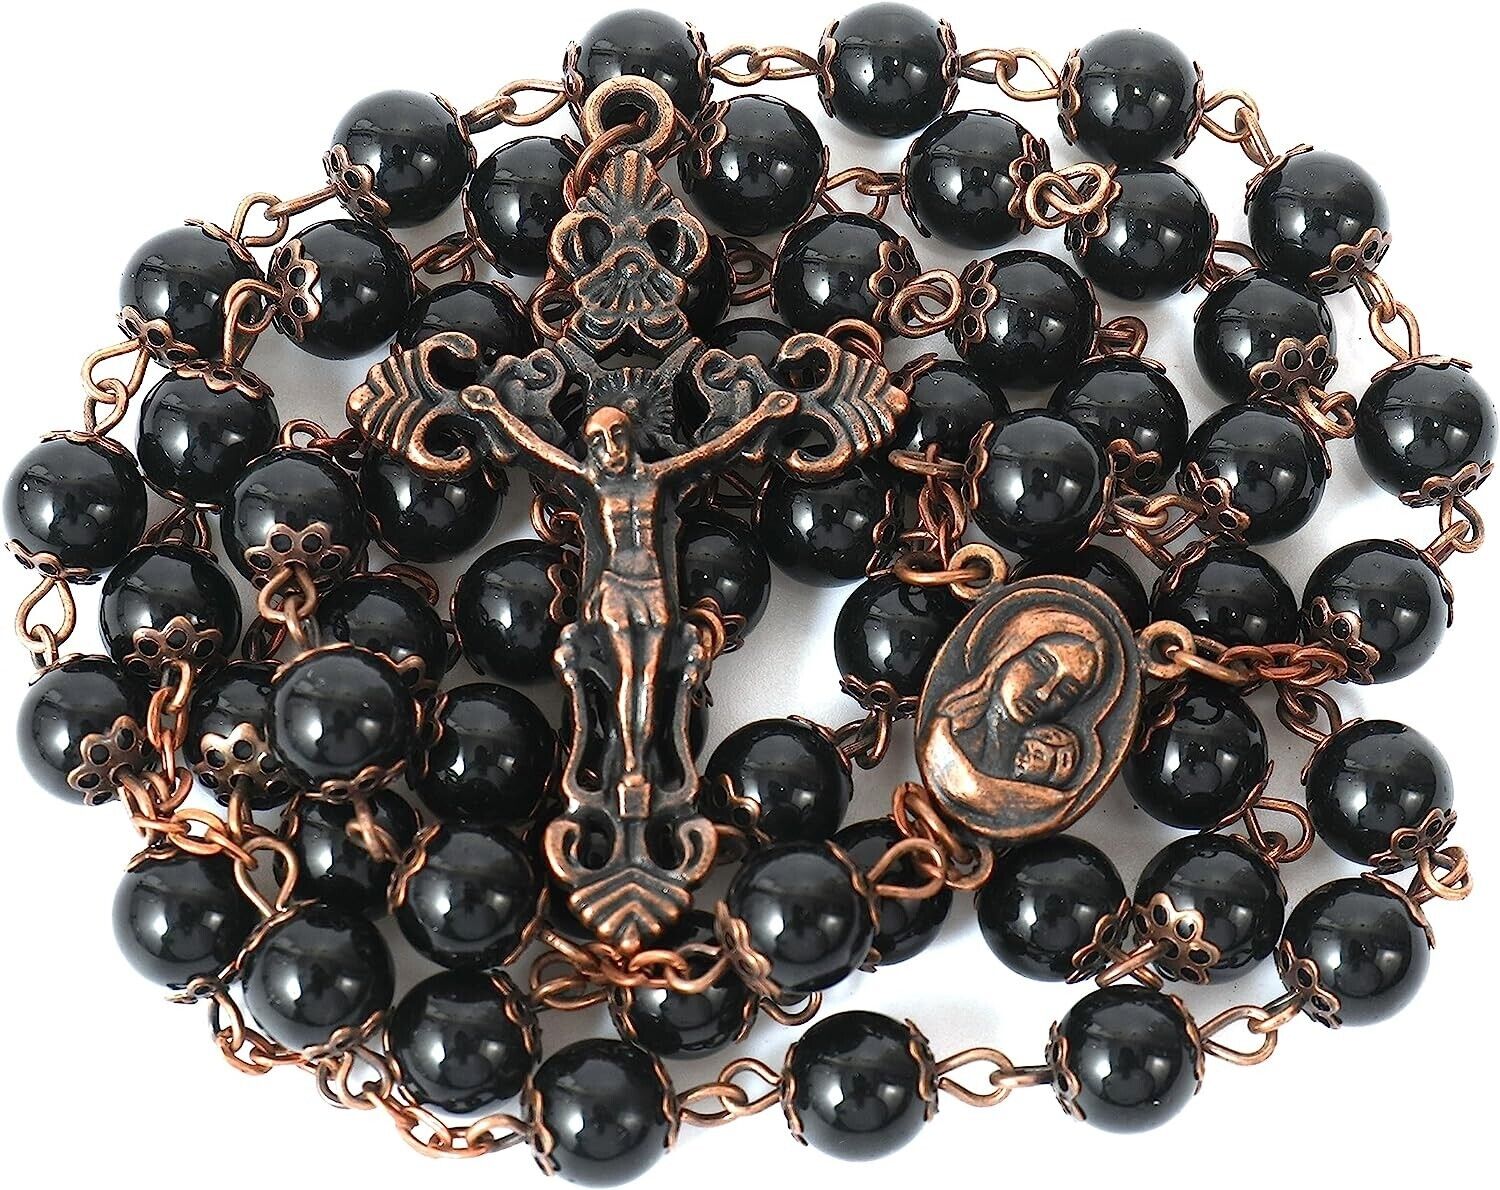 Black Obsidian Natural Stone Rosary Beads Necklace Holy Soil & Cross Crucifix Nazareth Store